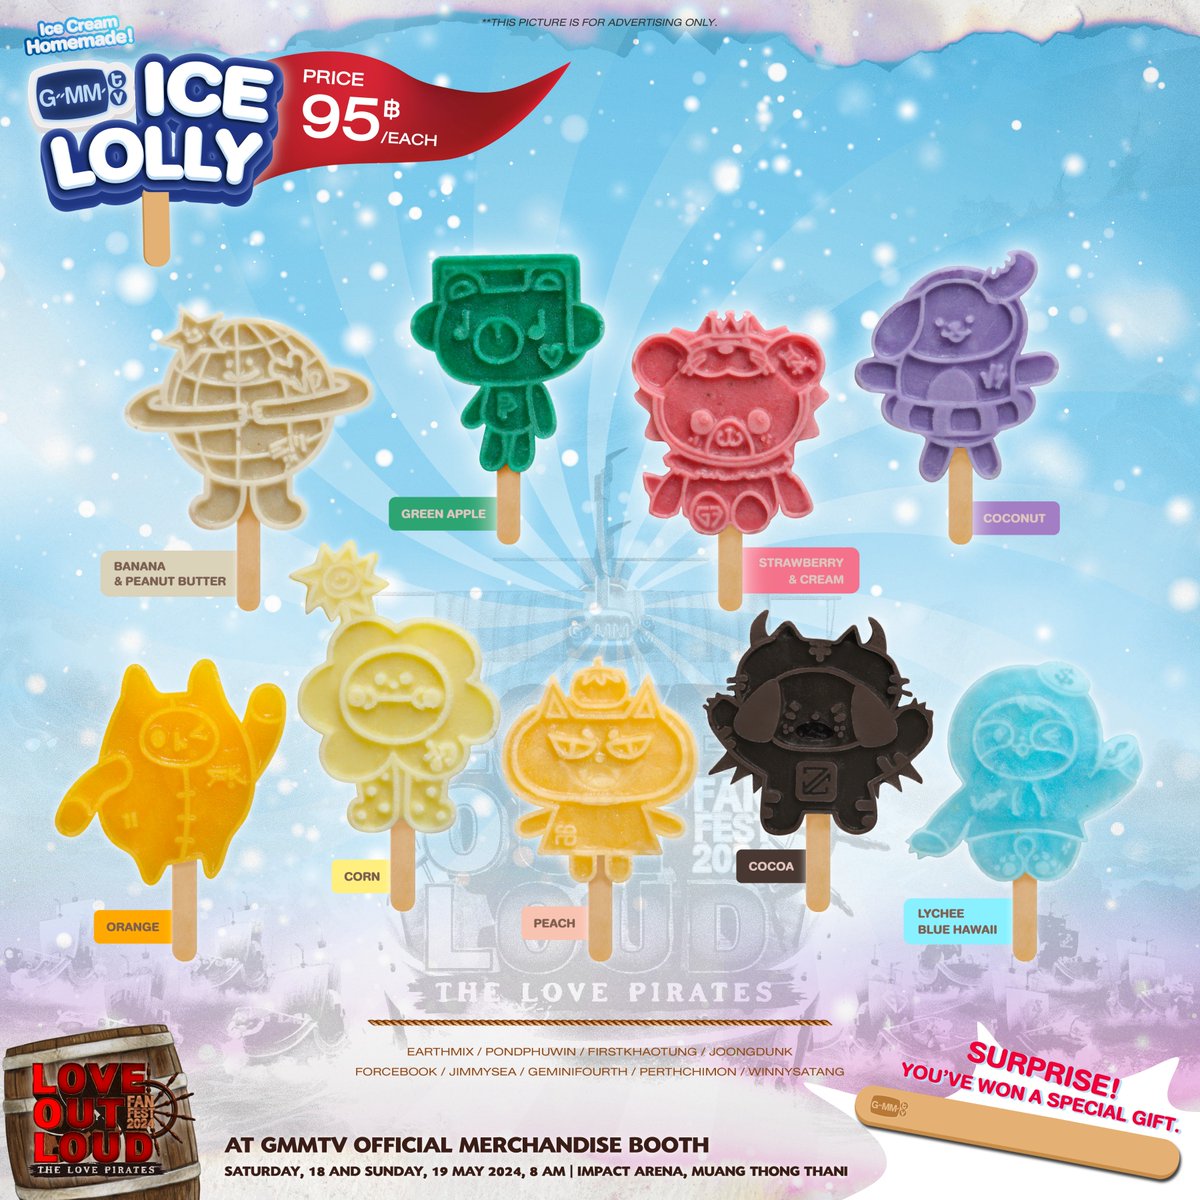 Ready to refresh you at the LOVE OUT LOUD FAN FEST 2024 : THE LOVE PIRATES with GMMTV ICE LOLLY (9 flavors). Plus, a surprise awaits, and you could win a gift! GMMTV OFFICIAL MERCHANDISE booth 18-19 May 2024 8 AM onwards Impact Arena, Muang Thong Thani #LOLFanFest2024 #GMMTV